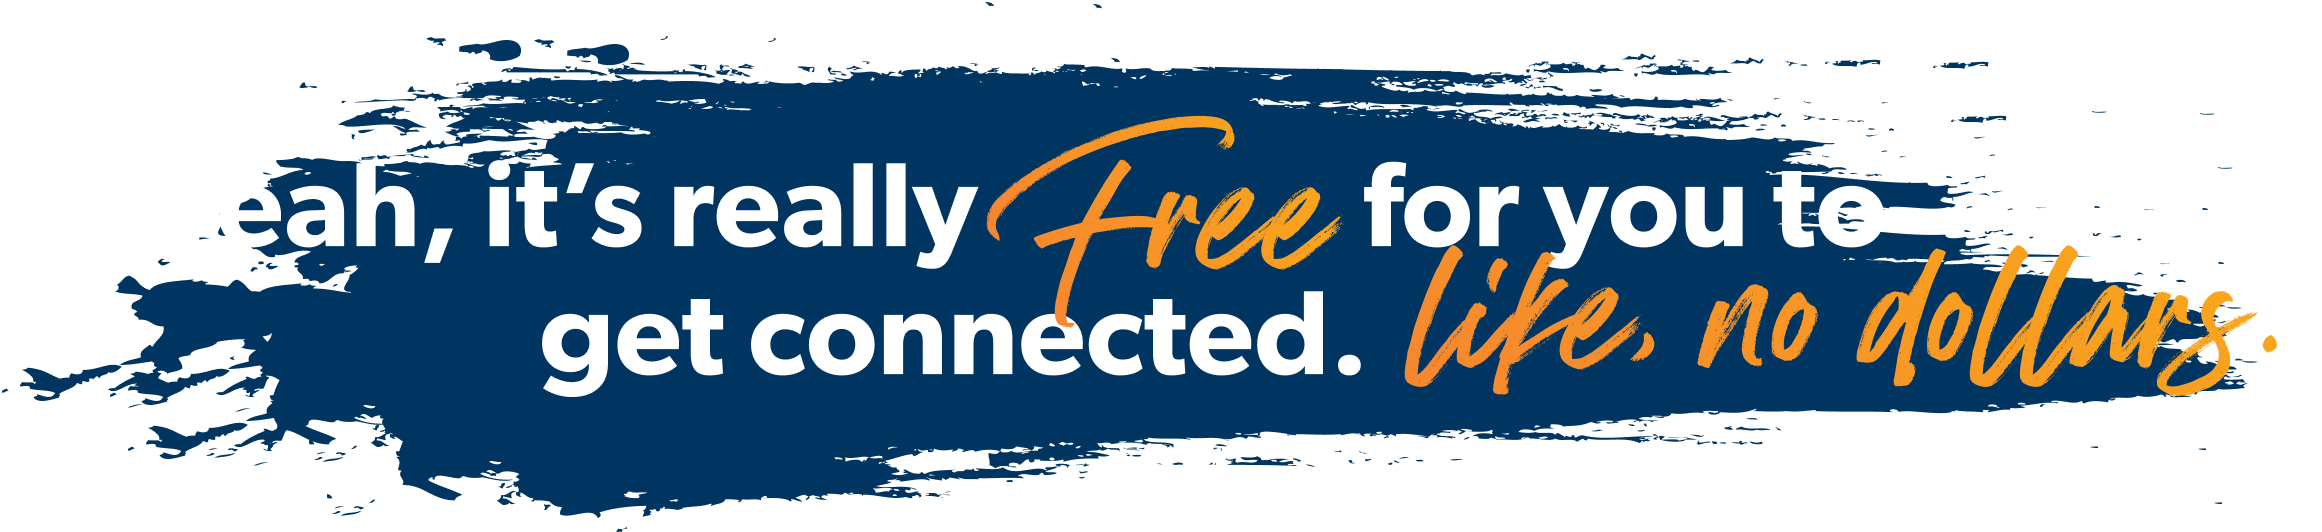 Yeah, it's really free for you to get connected. Like, no dollars